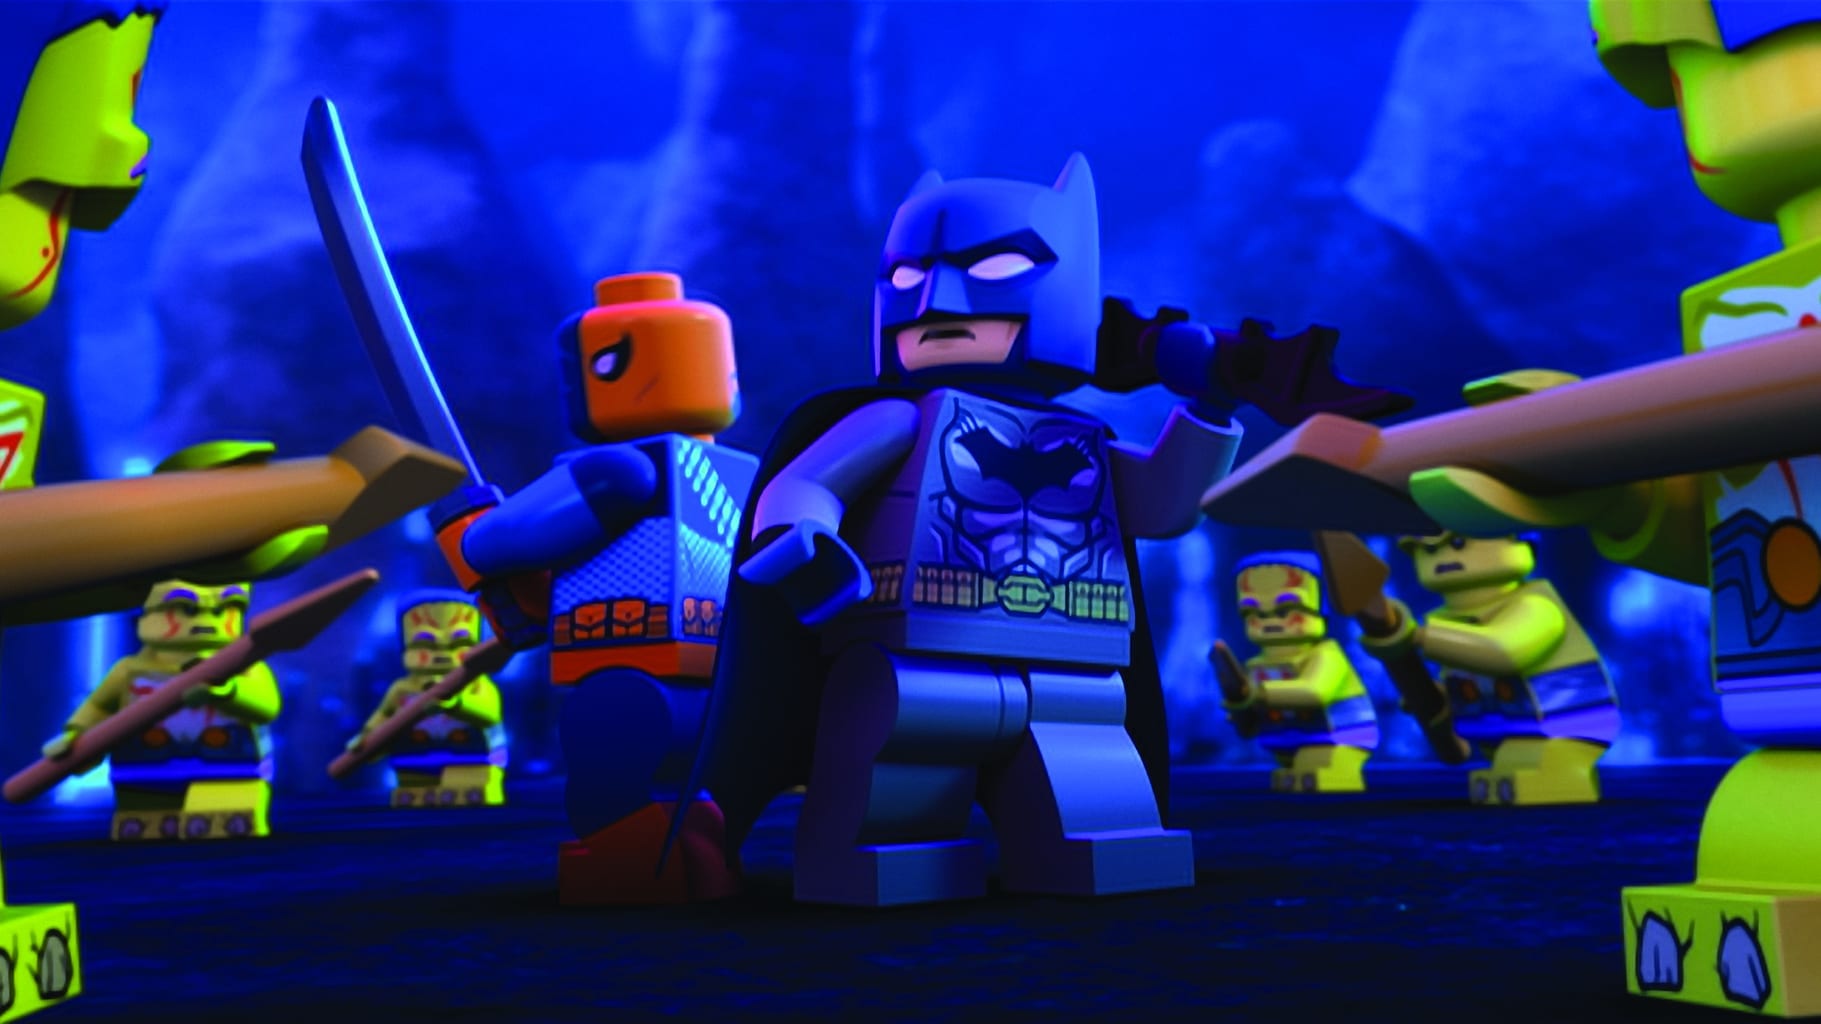 The LEGO Batman Movie review: Lego just fixed the DC Superhero